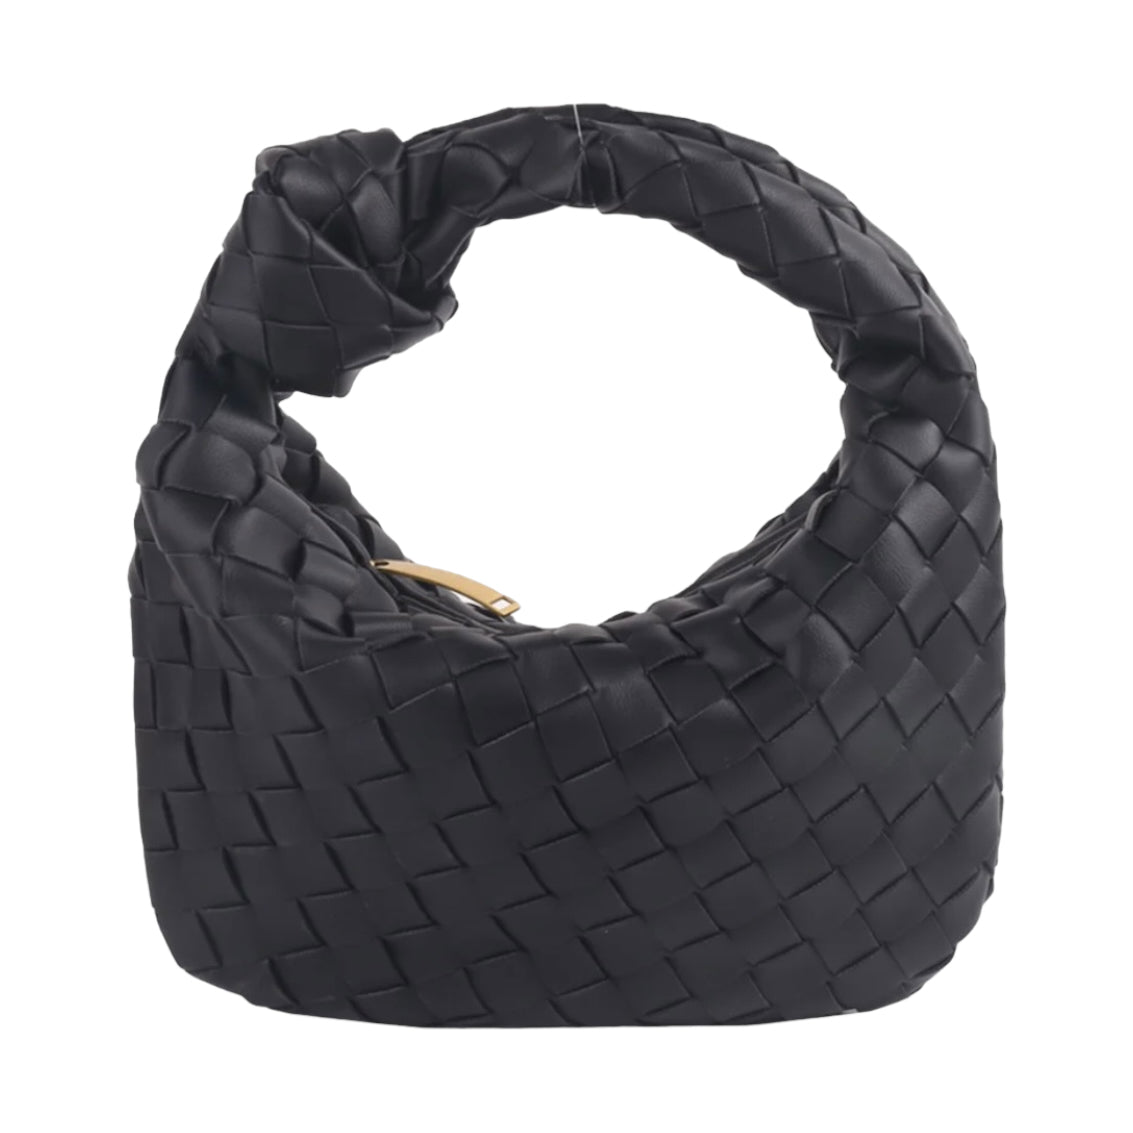 KNOT BAG BLACK - PREORDER EARLY JUNE DELIVERY